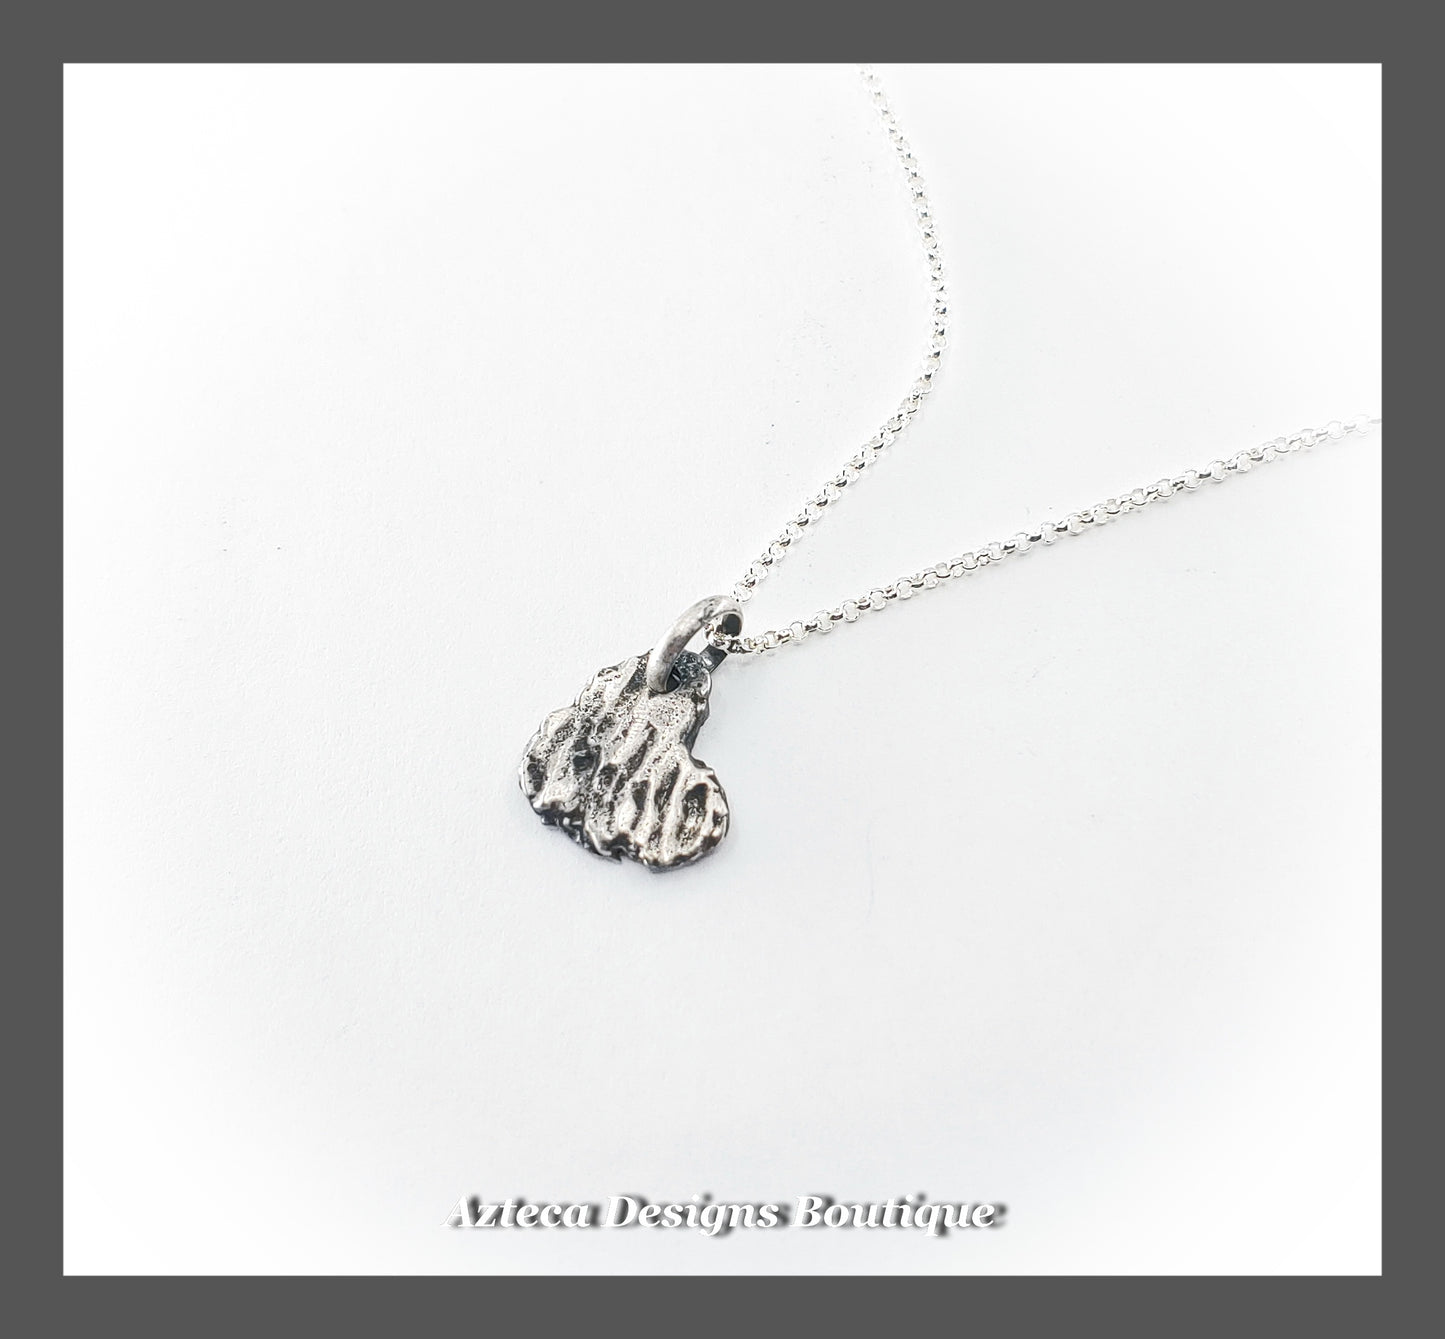 Rustic Forged Sterling Silver Heart Necklace